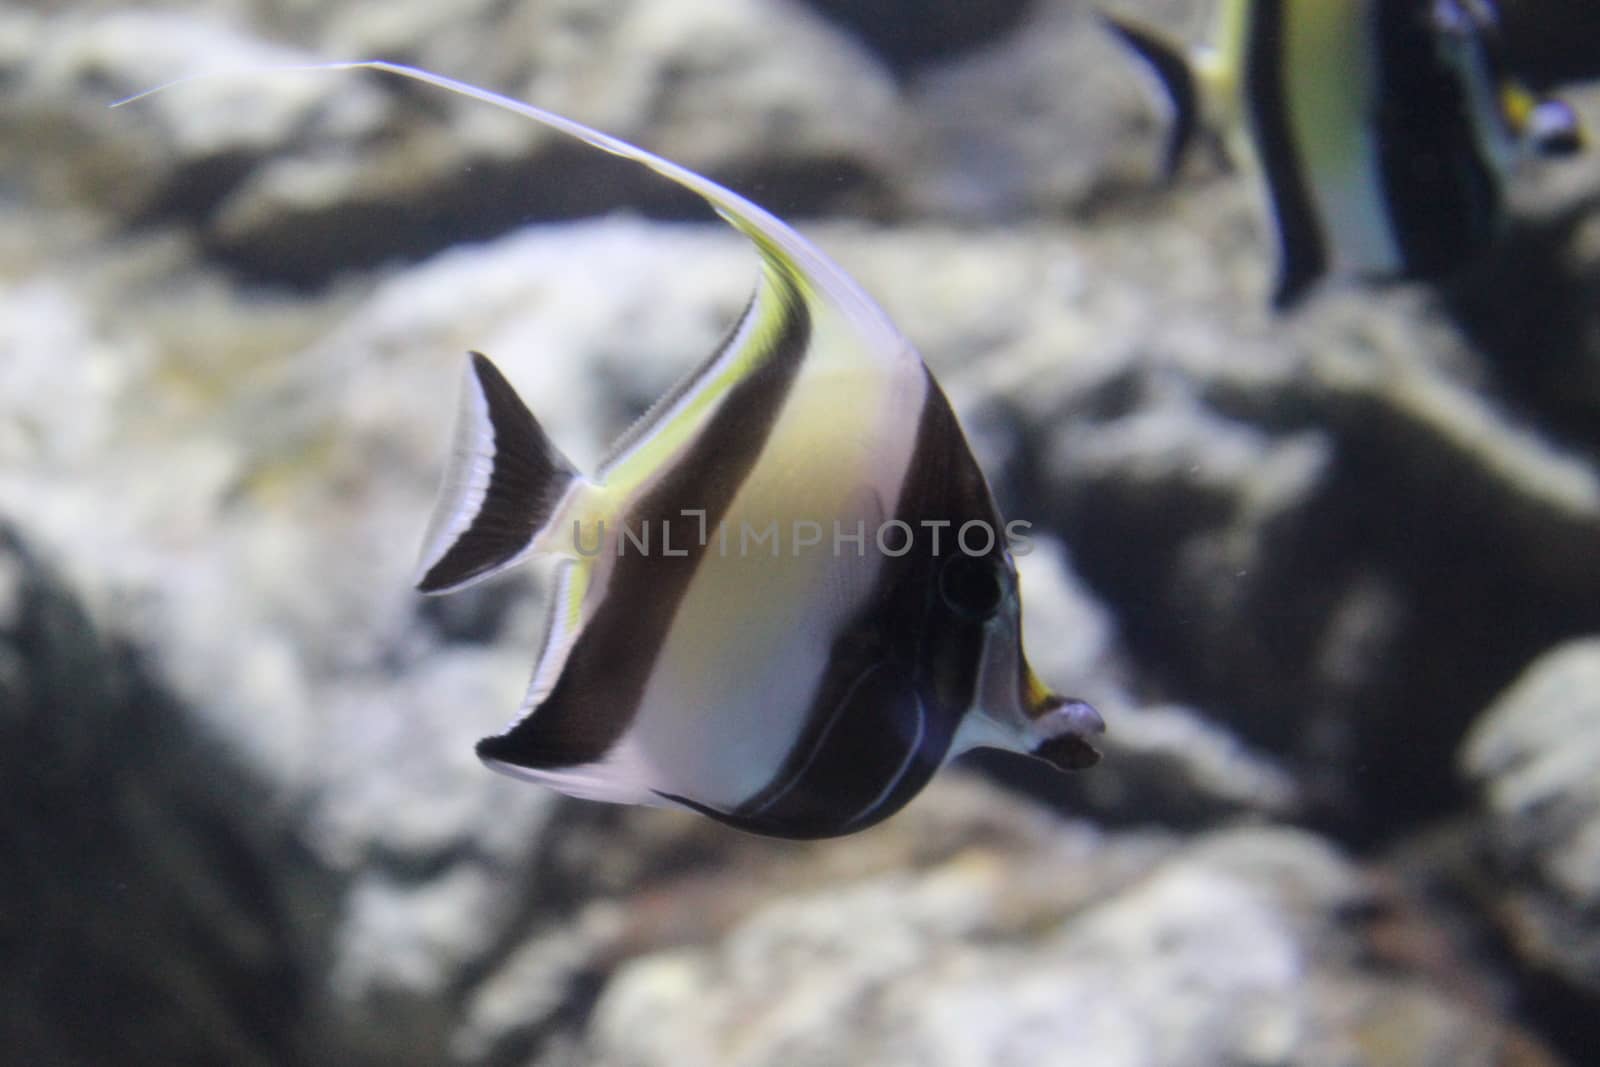 Fish striped angelfish in the water of the aquarium.